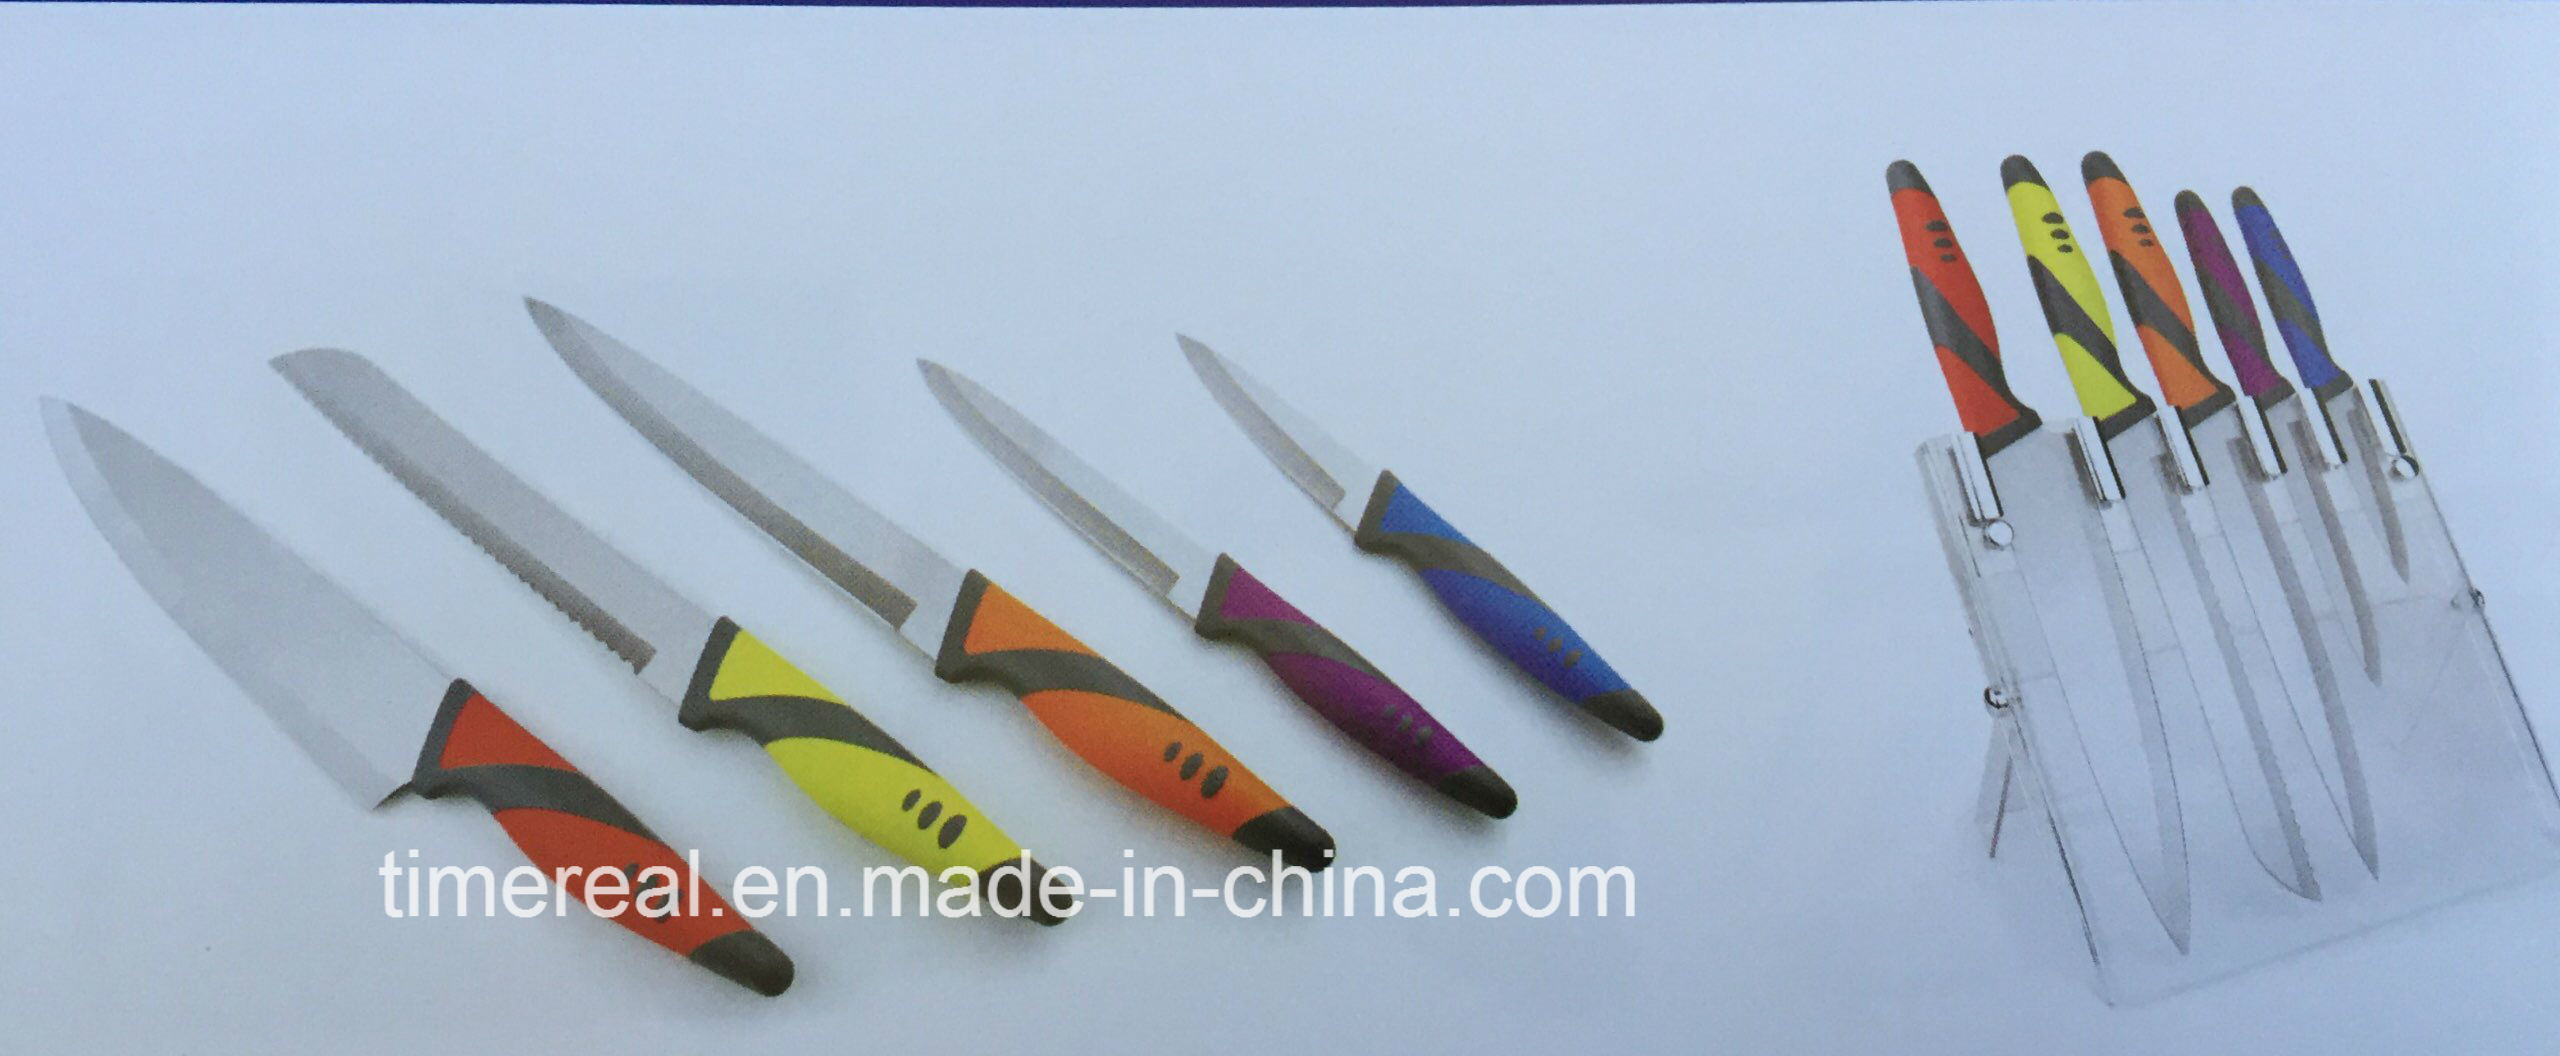 New Fashion Design for Wheat Fiber Bowls -
 Stainless Steel Kitchen Knives Set with Painting No. Fj-0034 – Long Prosper